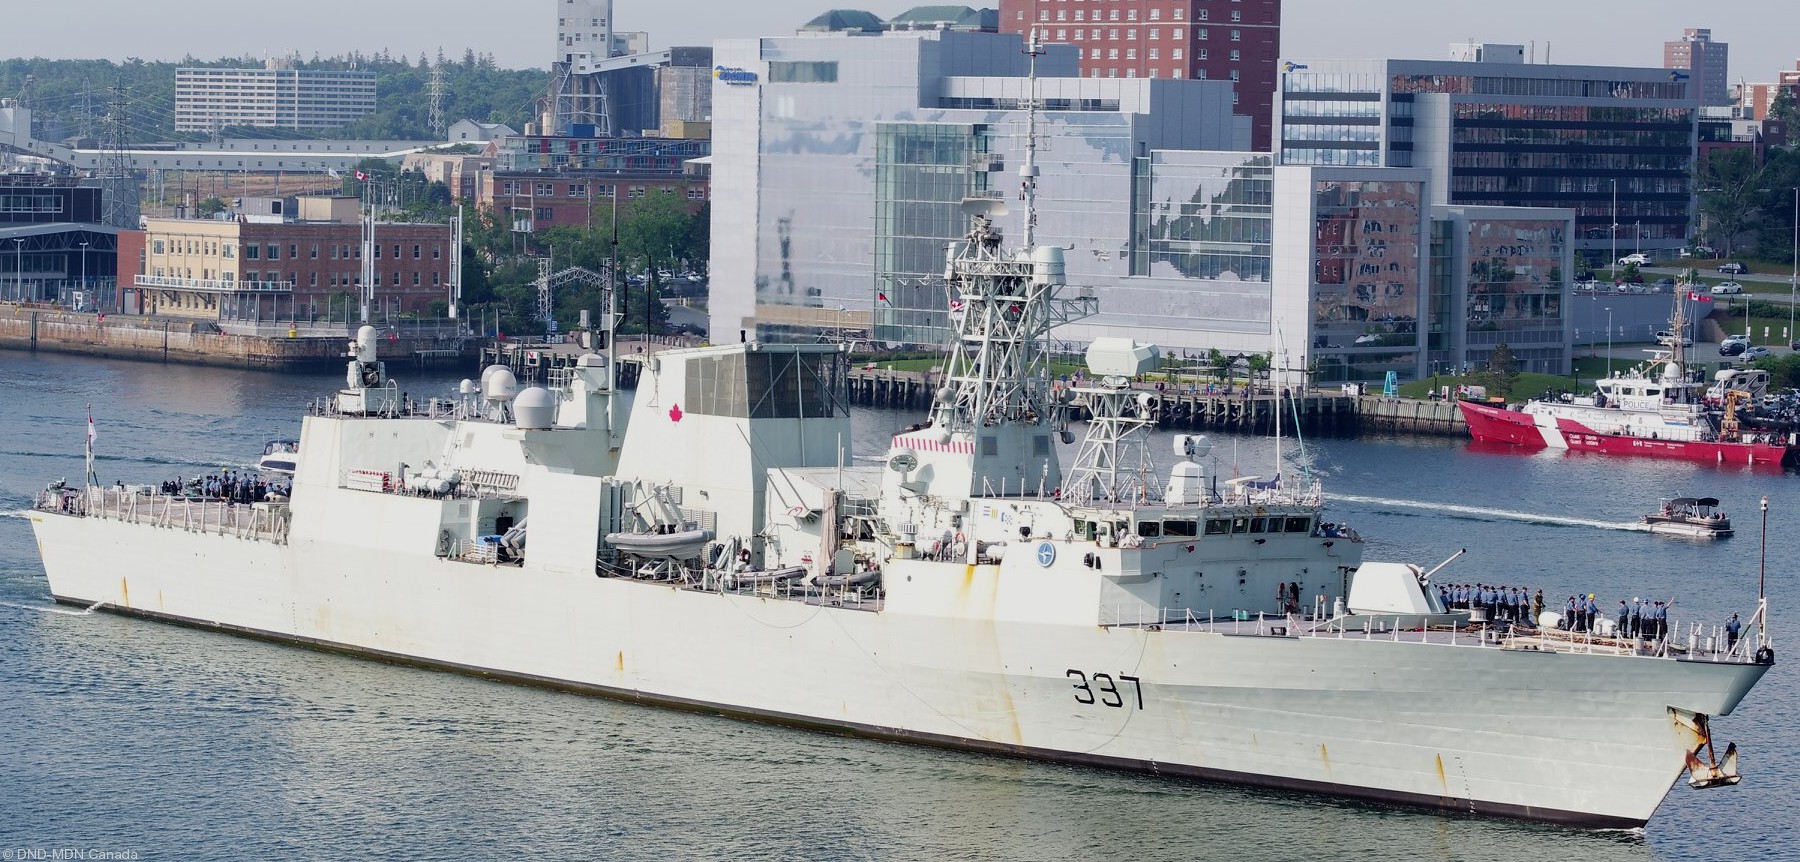 ffh-337 hmcs fredericton halifax class helicopter patrol frigate ncsm royal canadian navy 14